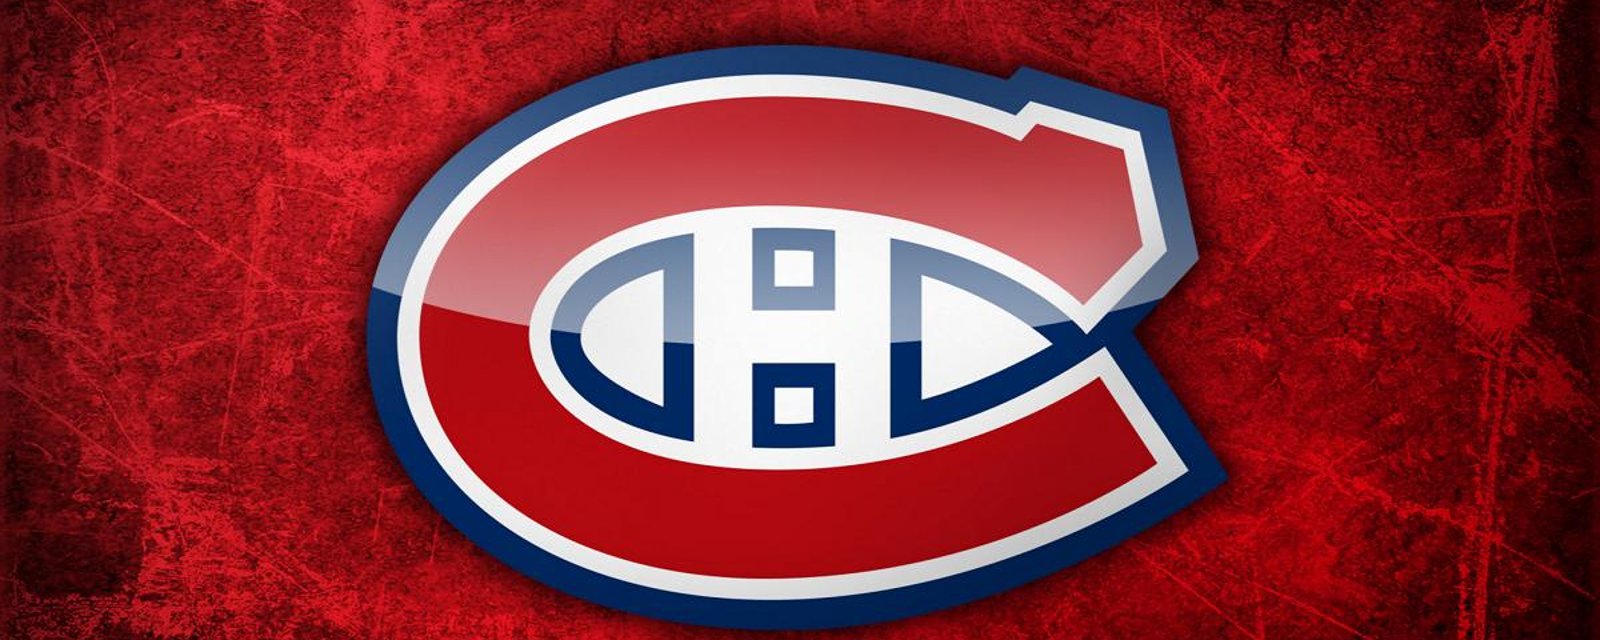 Habs unveil the logo, colors and uniforms of their new AHL affiliate the Laval Rocket.